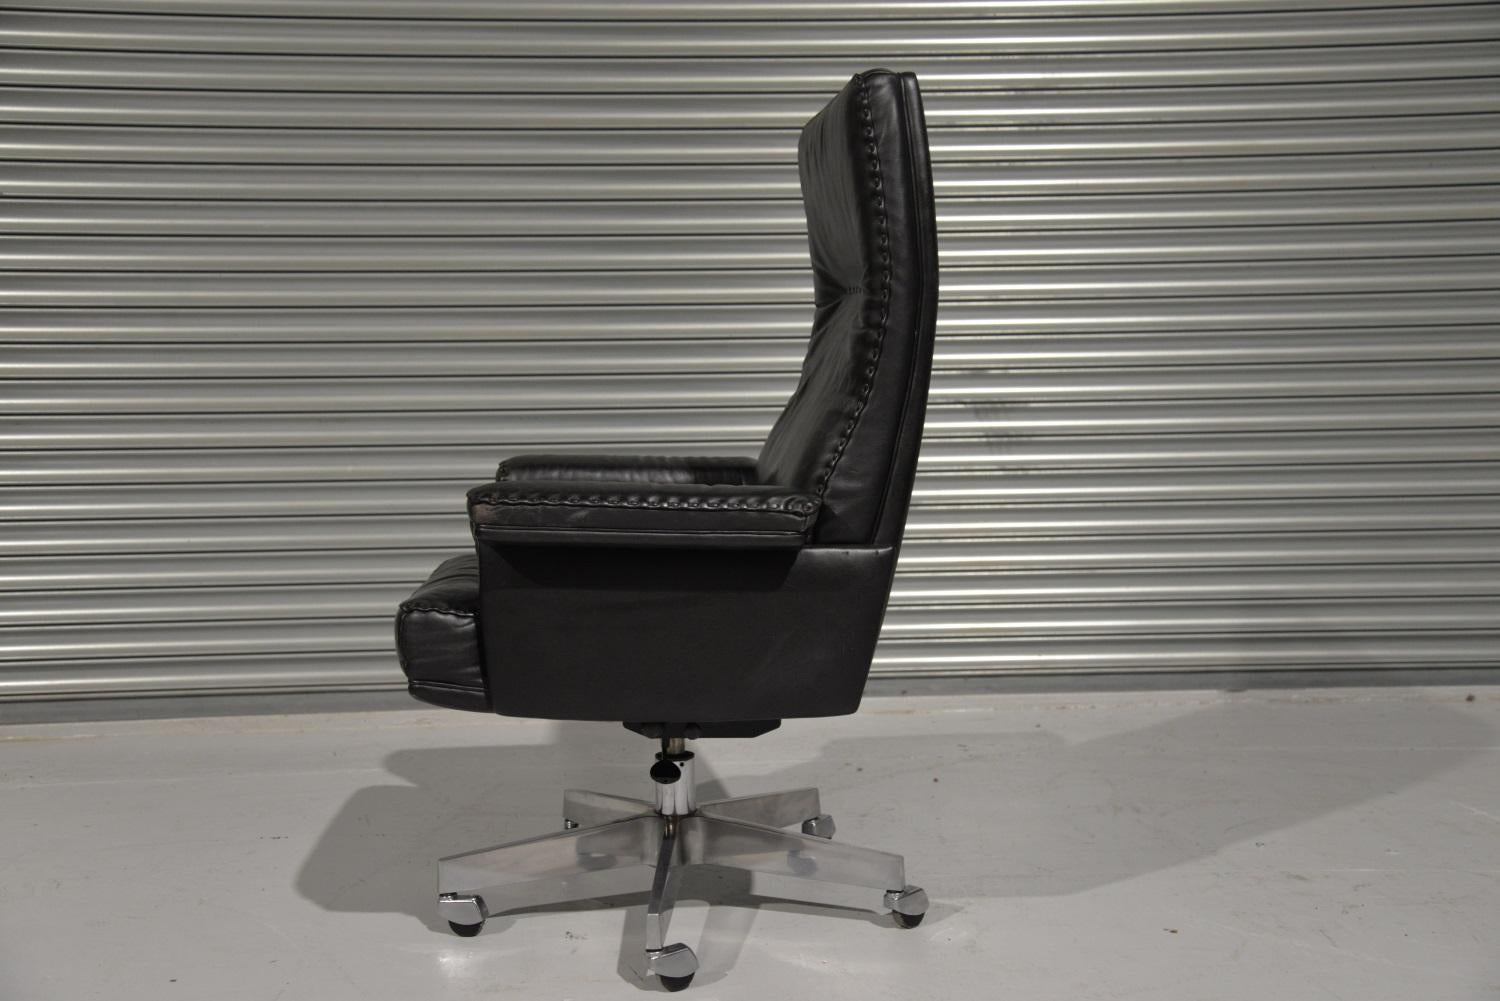 Discounted airfreight for our US and International customers (from 2 weeks door to door).

We are delighted to bring to you an extremely rare vintage De Sede DS 35 Executive armchair on casters. Built to incredibly high standards by De Sede